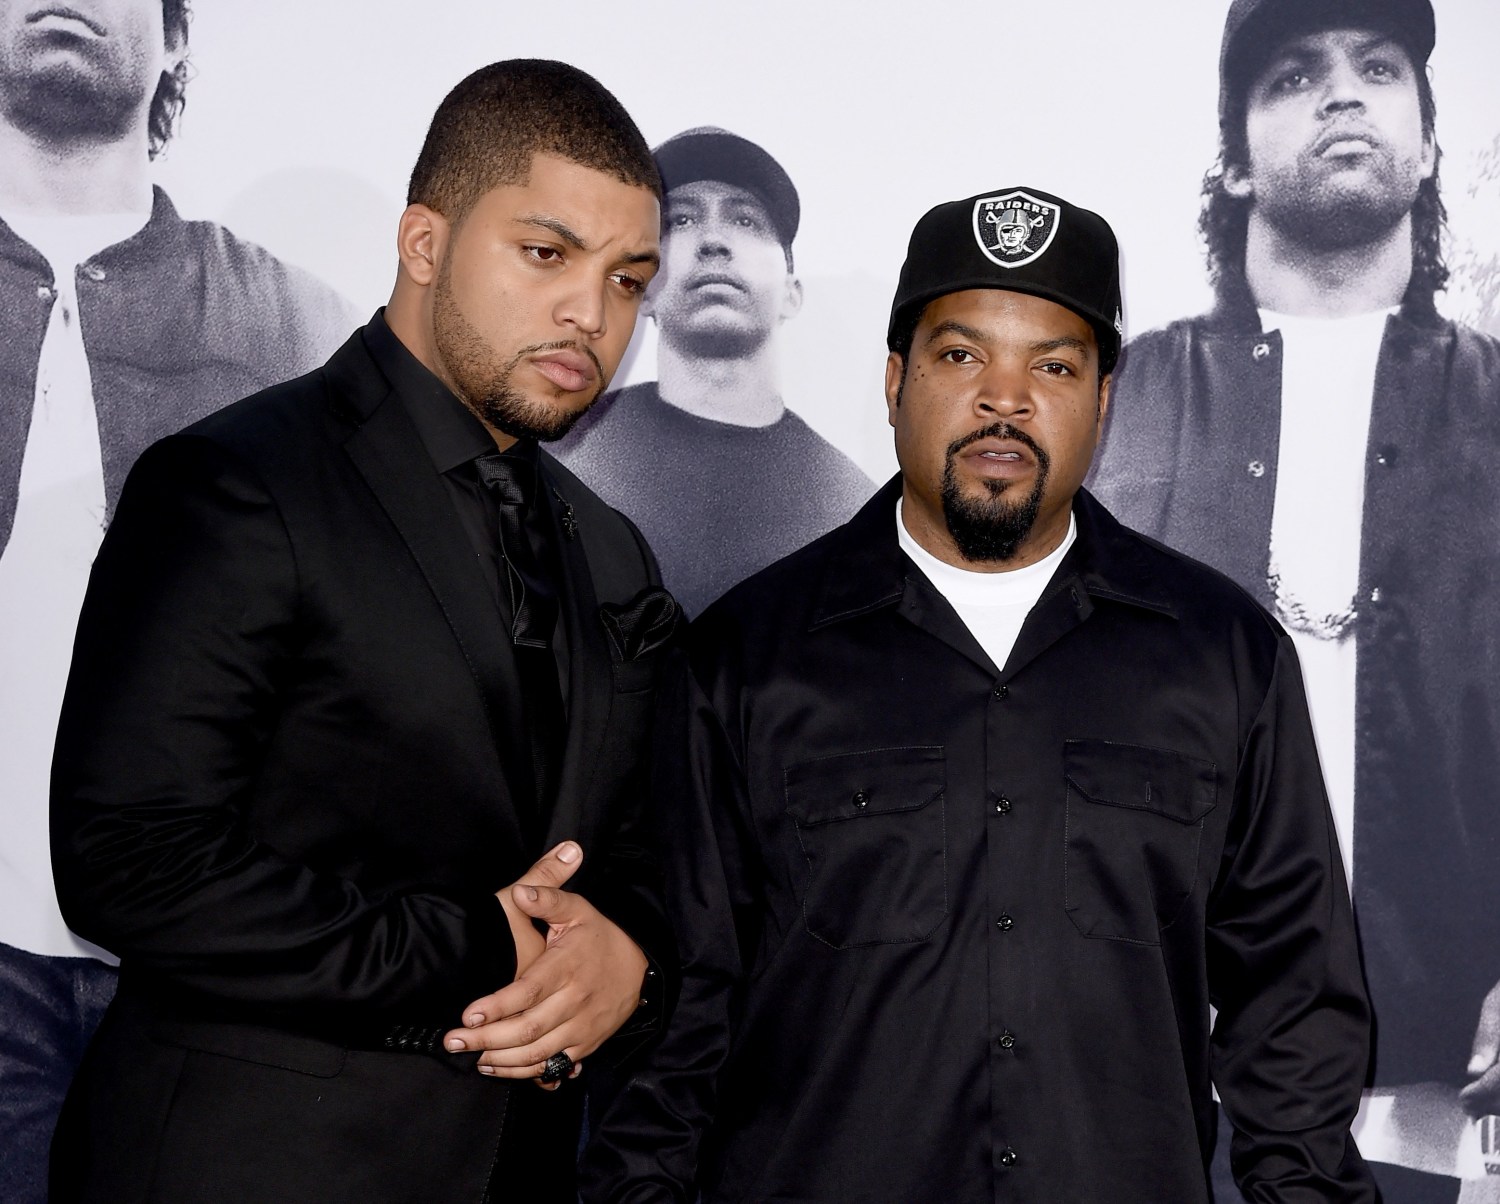 Universal: We Did Not Ask for Extra 'Straight Outta Compton' Security